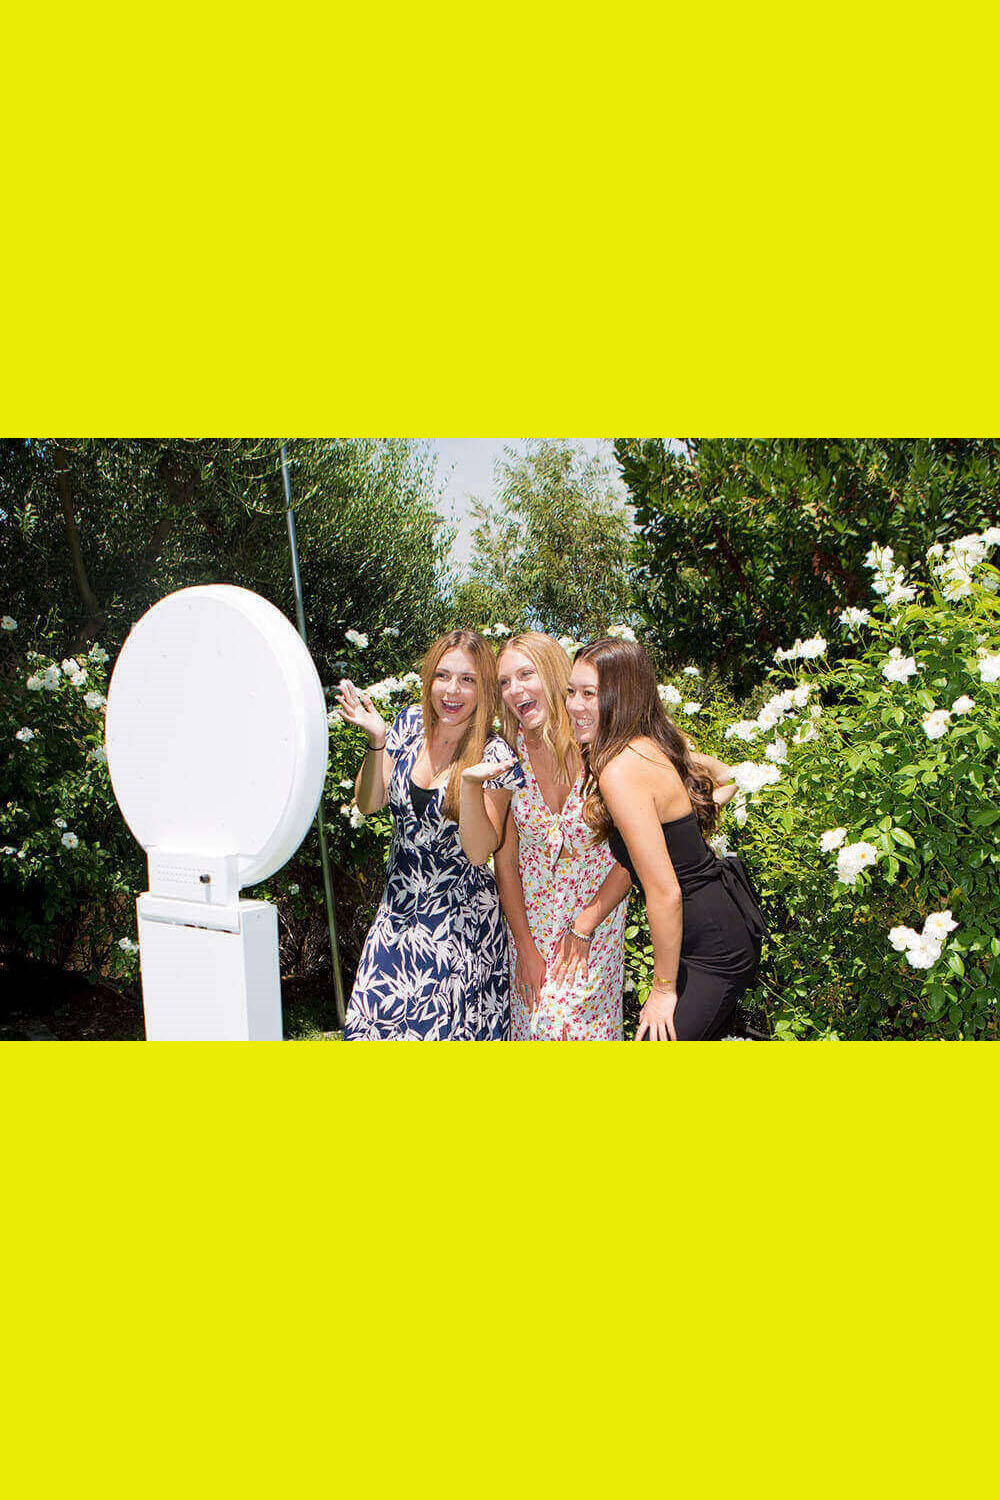 Three girls know how to have fun with this Malibu selfie station.